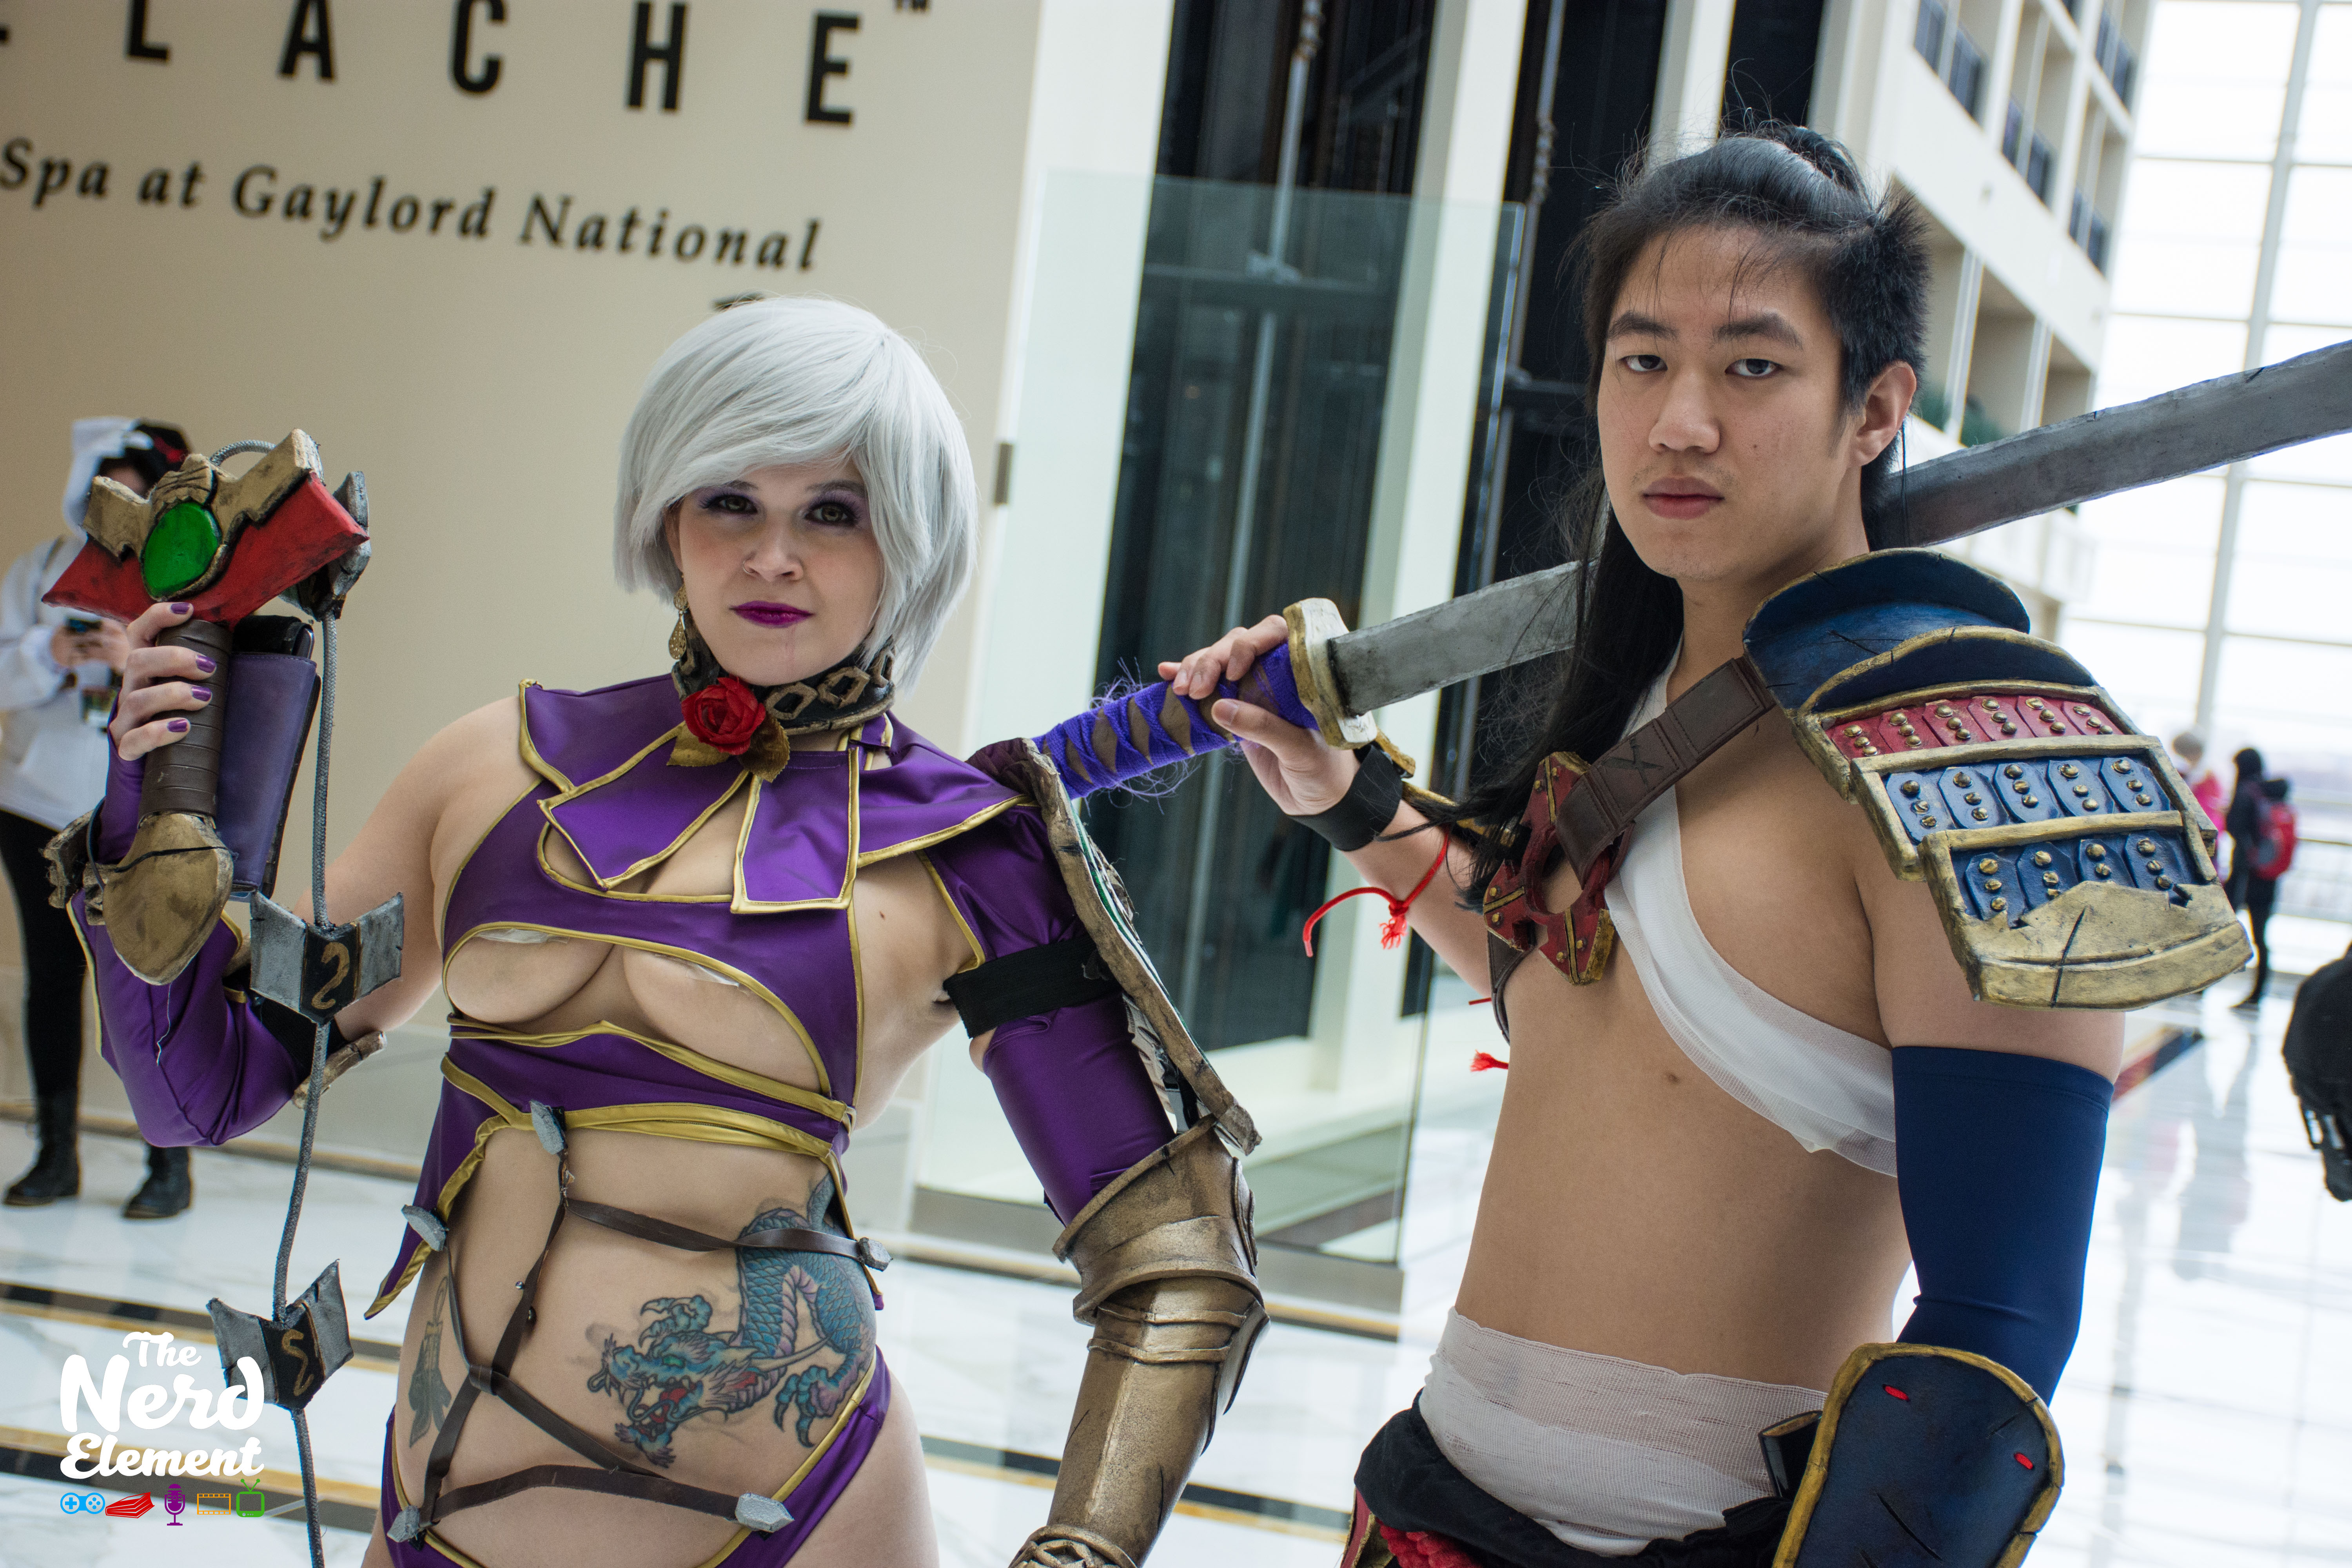 Ivy and Mitsurugi - Soul Calibur series
Cosplayers: Valkyrie Cosfit (fb) and hollandazemedia (ig)